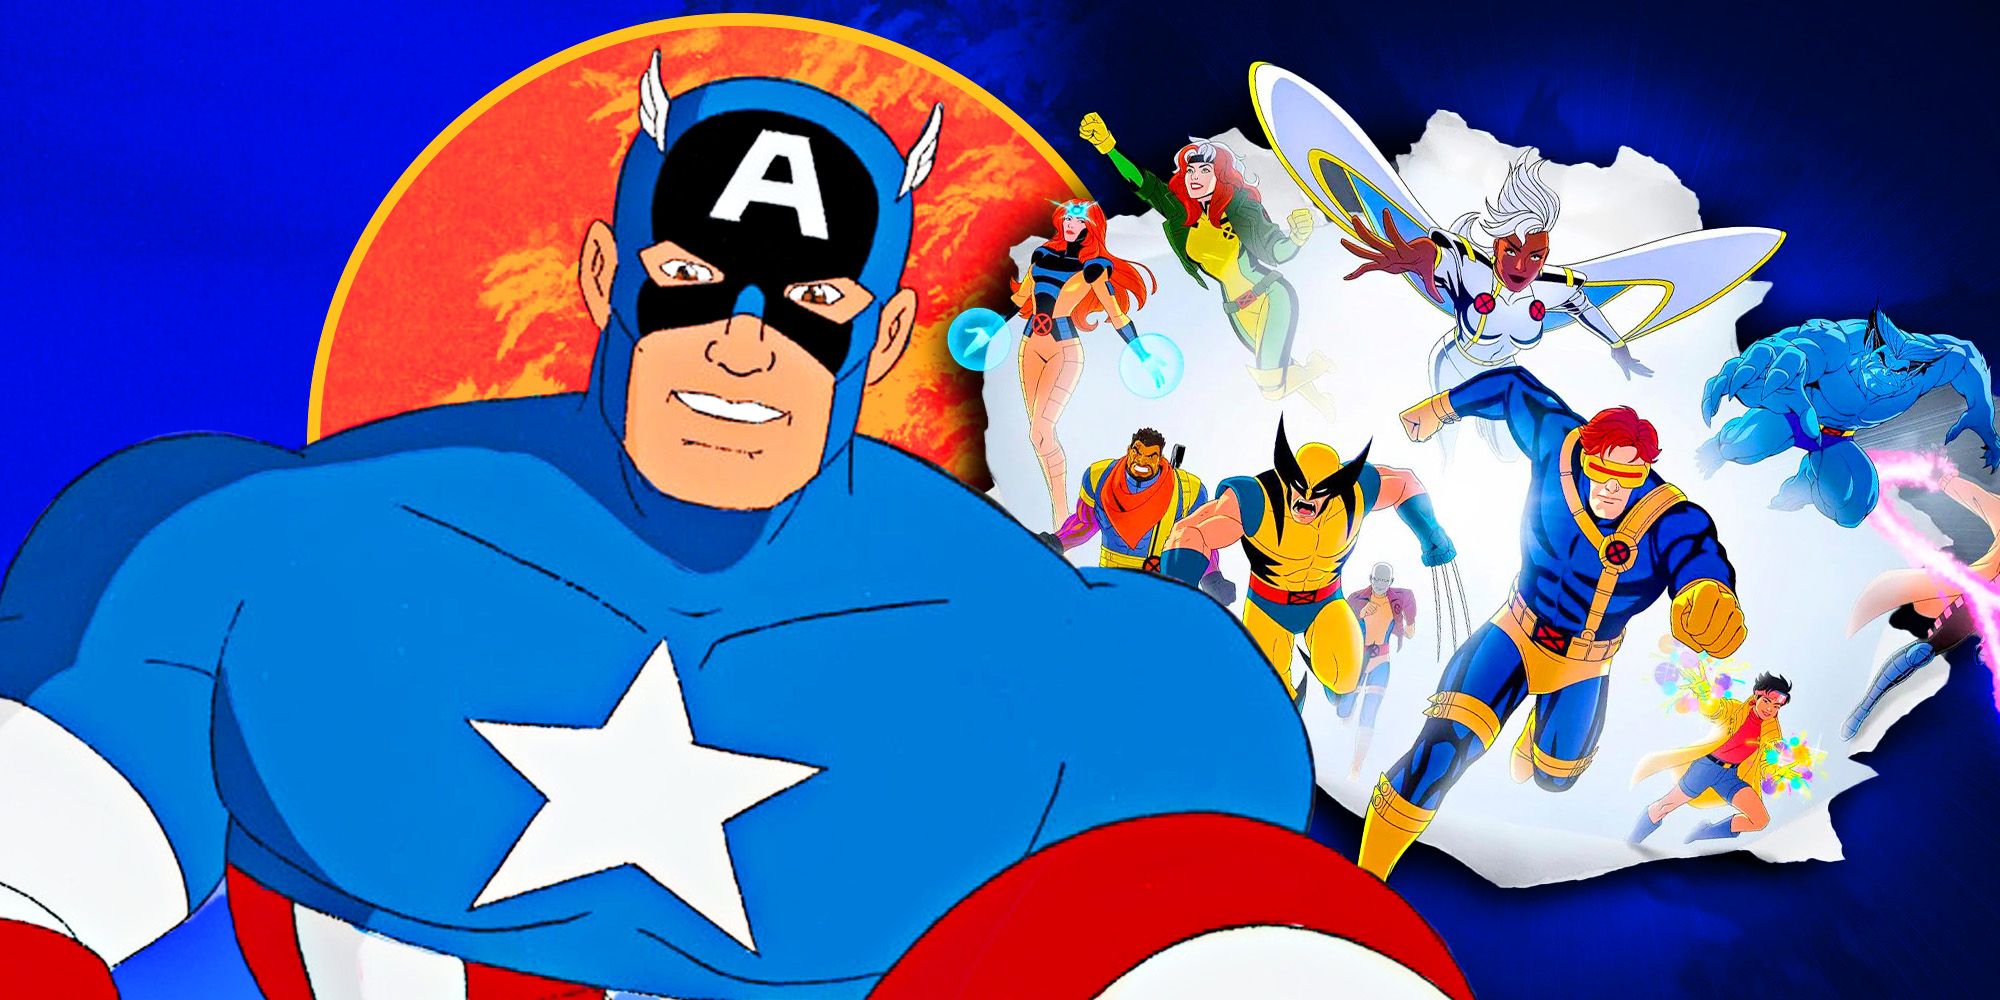 Animated Captain America and character promo image of the X-Men from X-Men 97